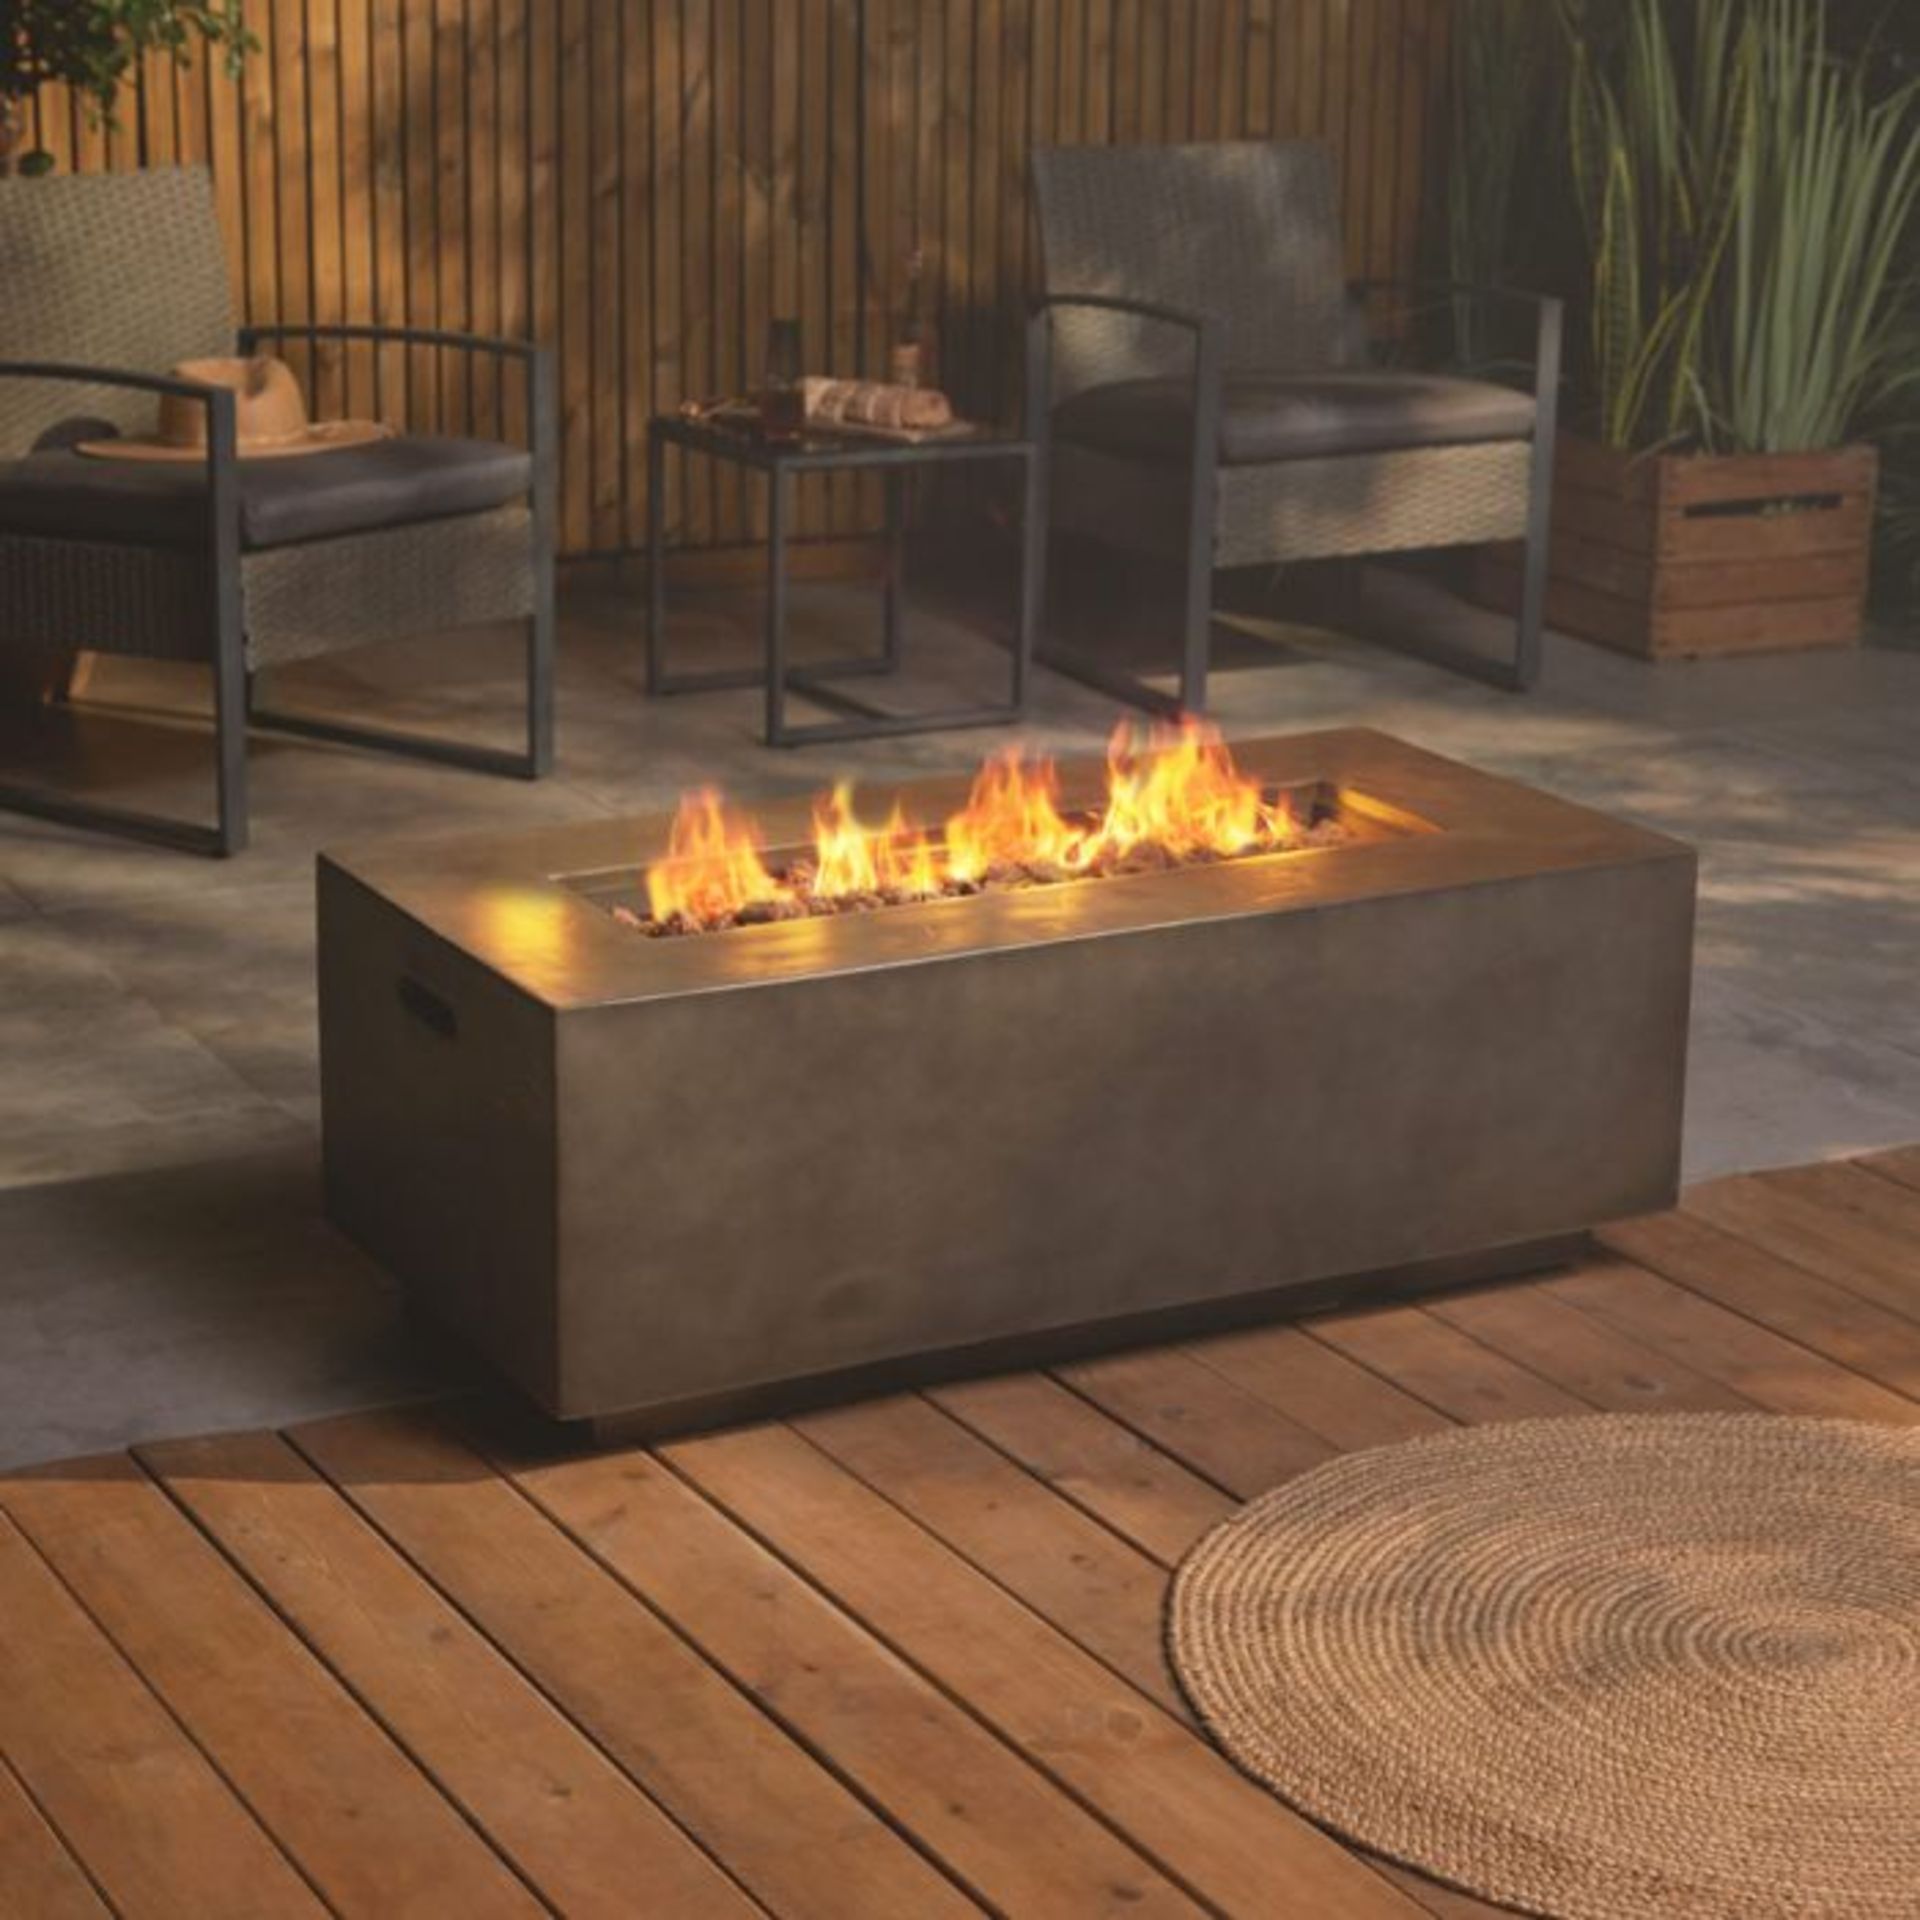 New Boxed - Rectangle Gas Fire Pit (REF557). Spend nights around the fire with this safe and easy- - Image 2 of 2